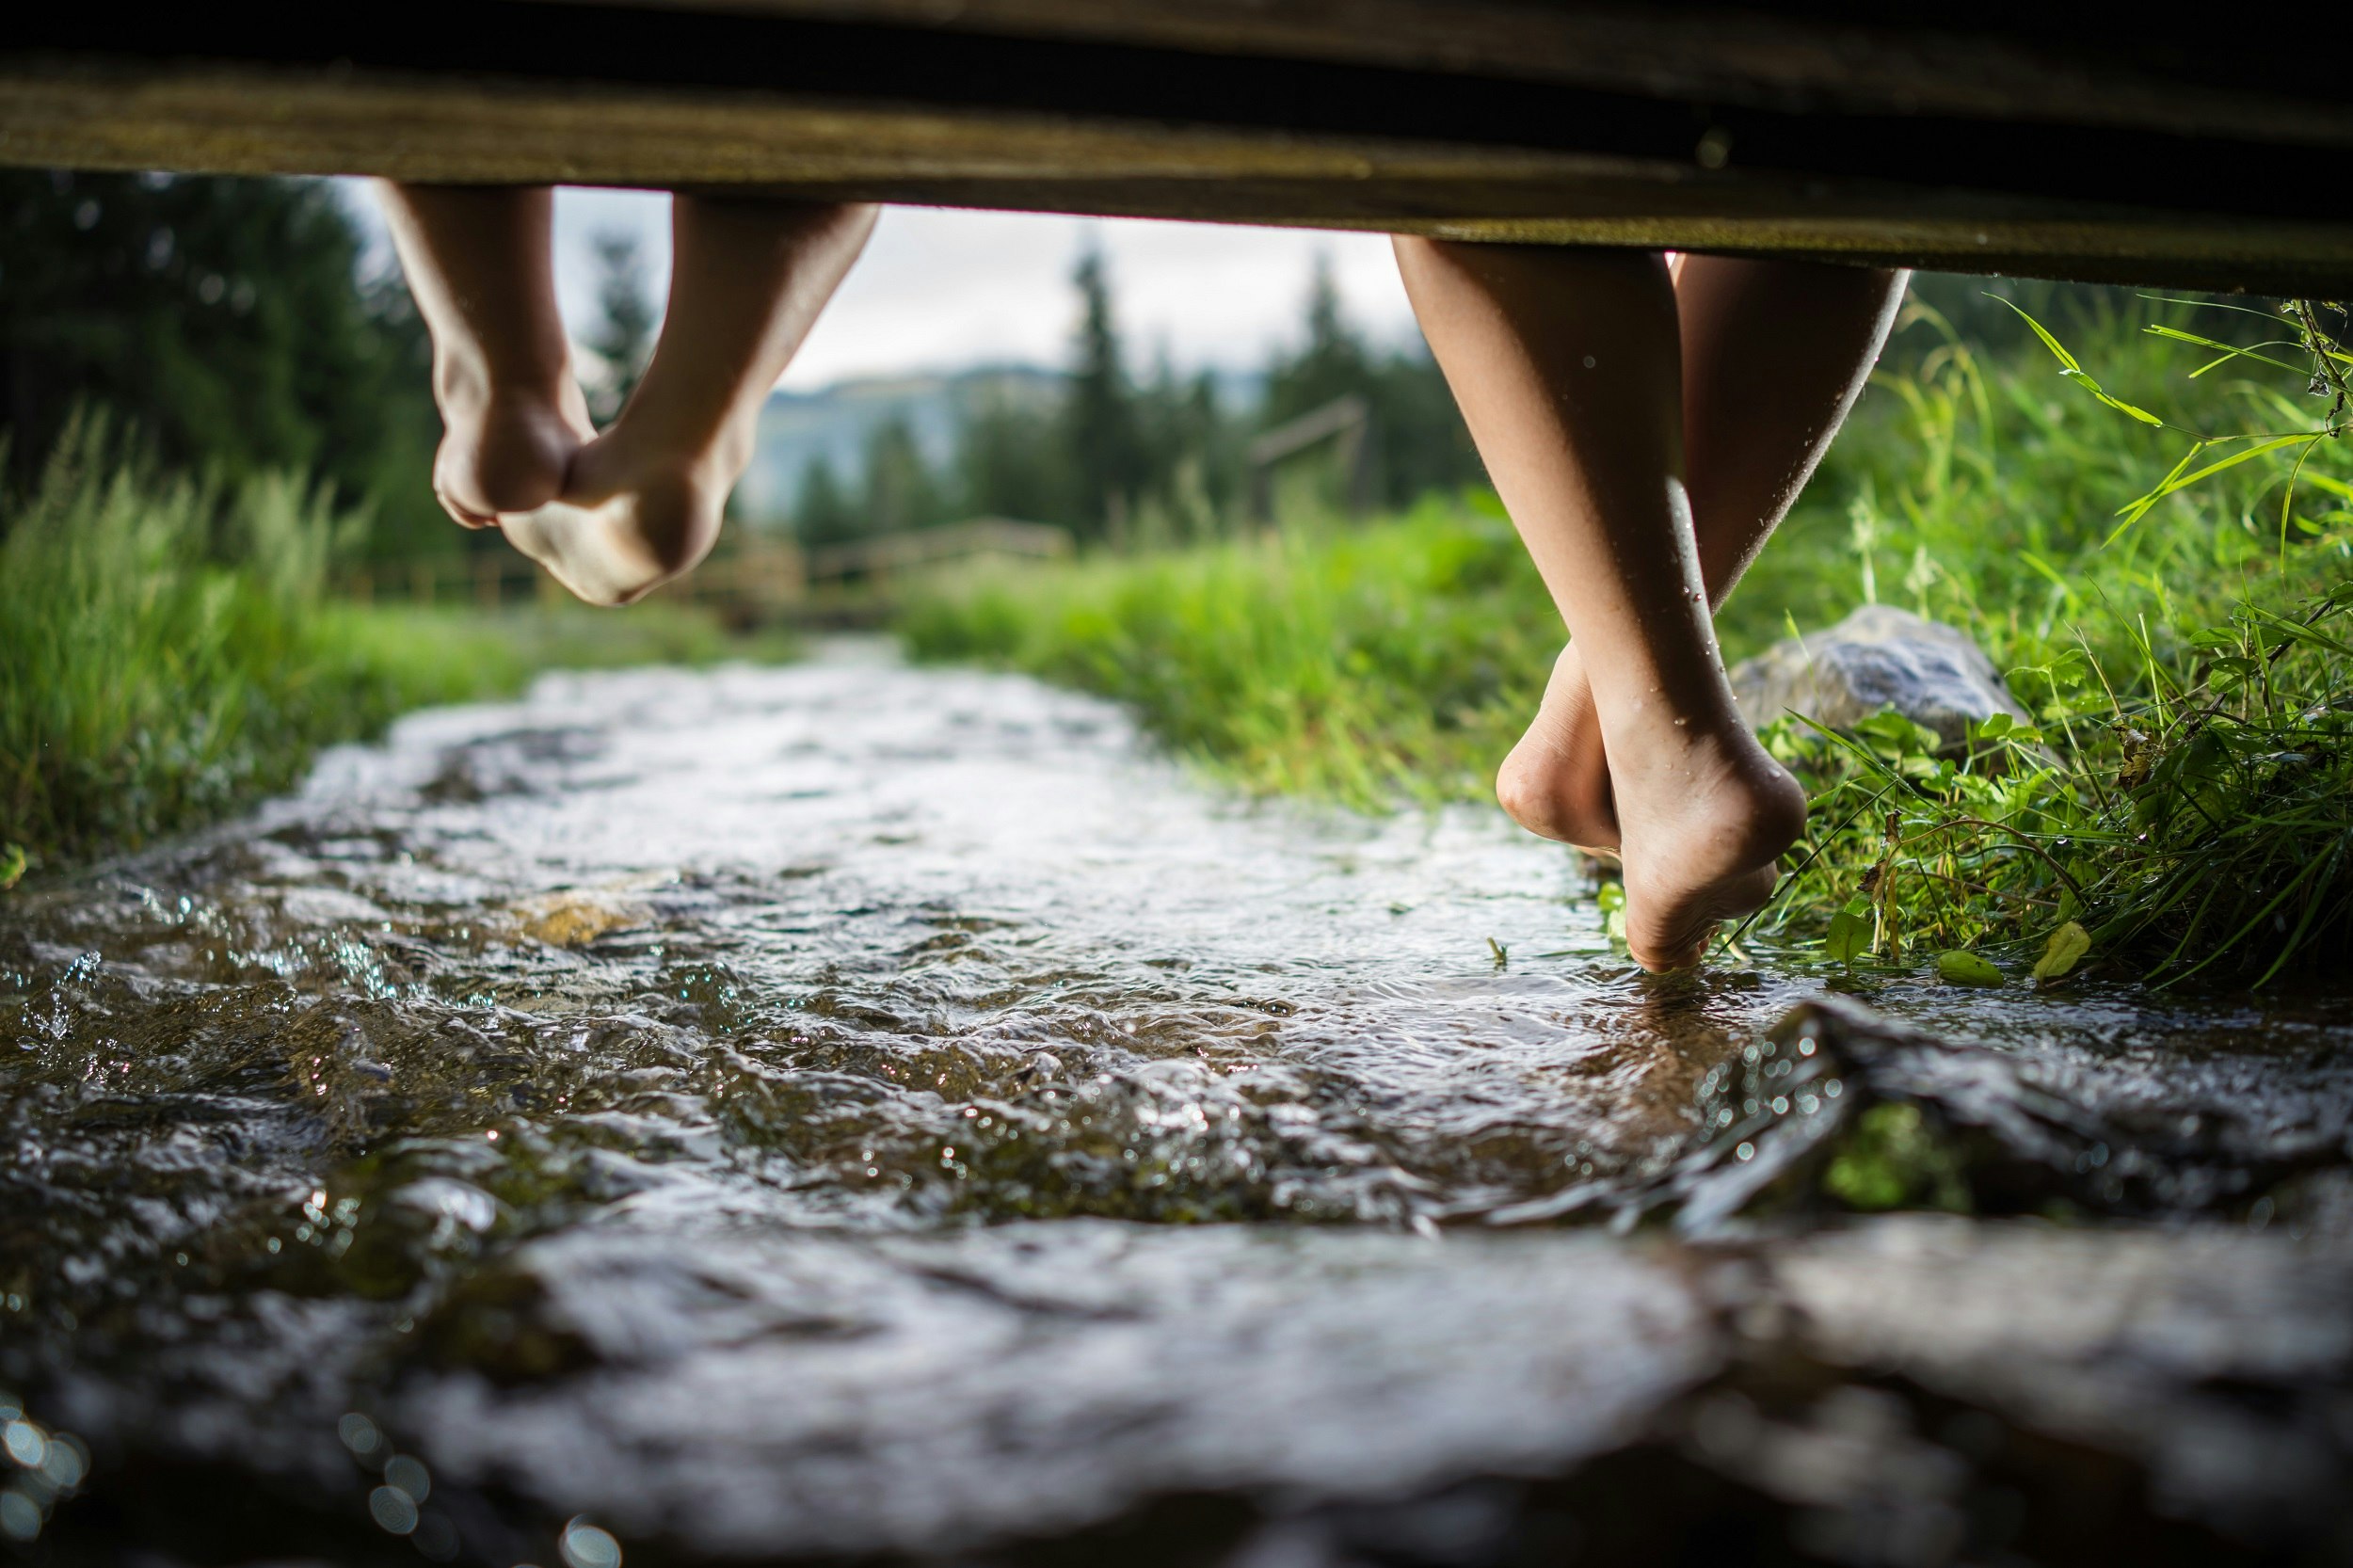 Children's feet hanging over a small stream from a wooden walkway; taken in the mountains.